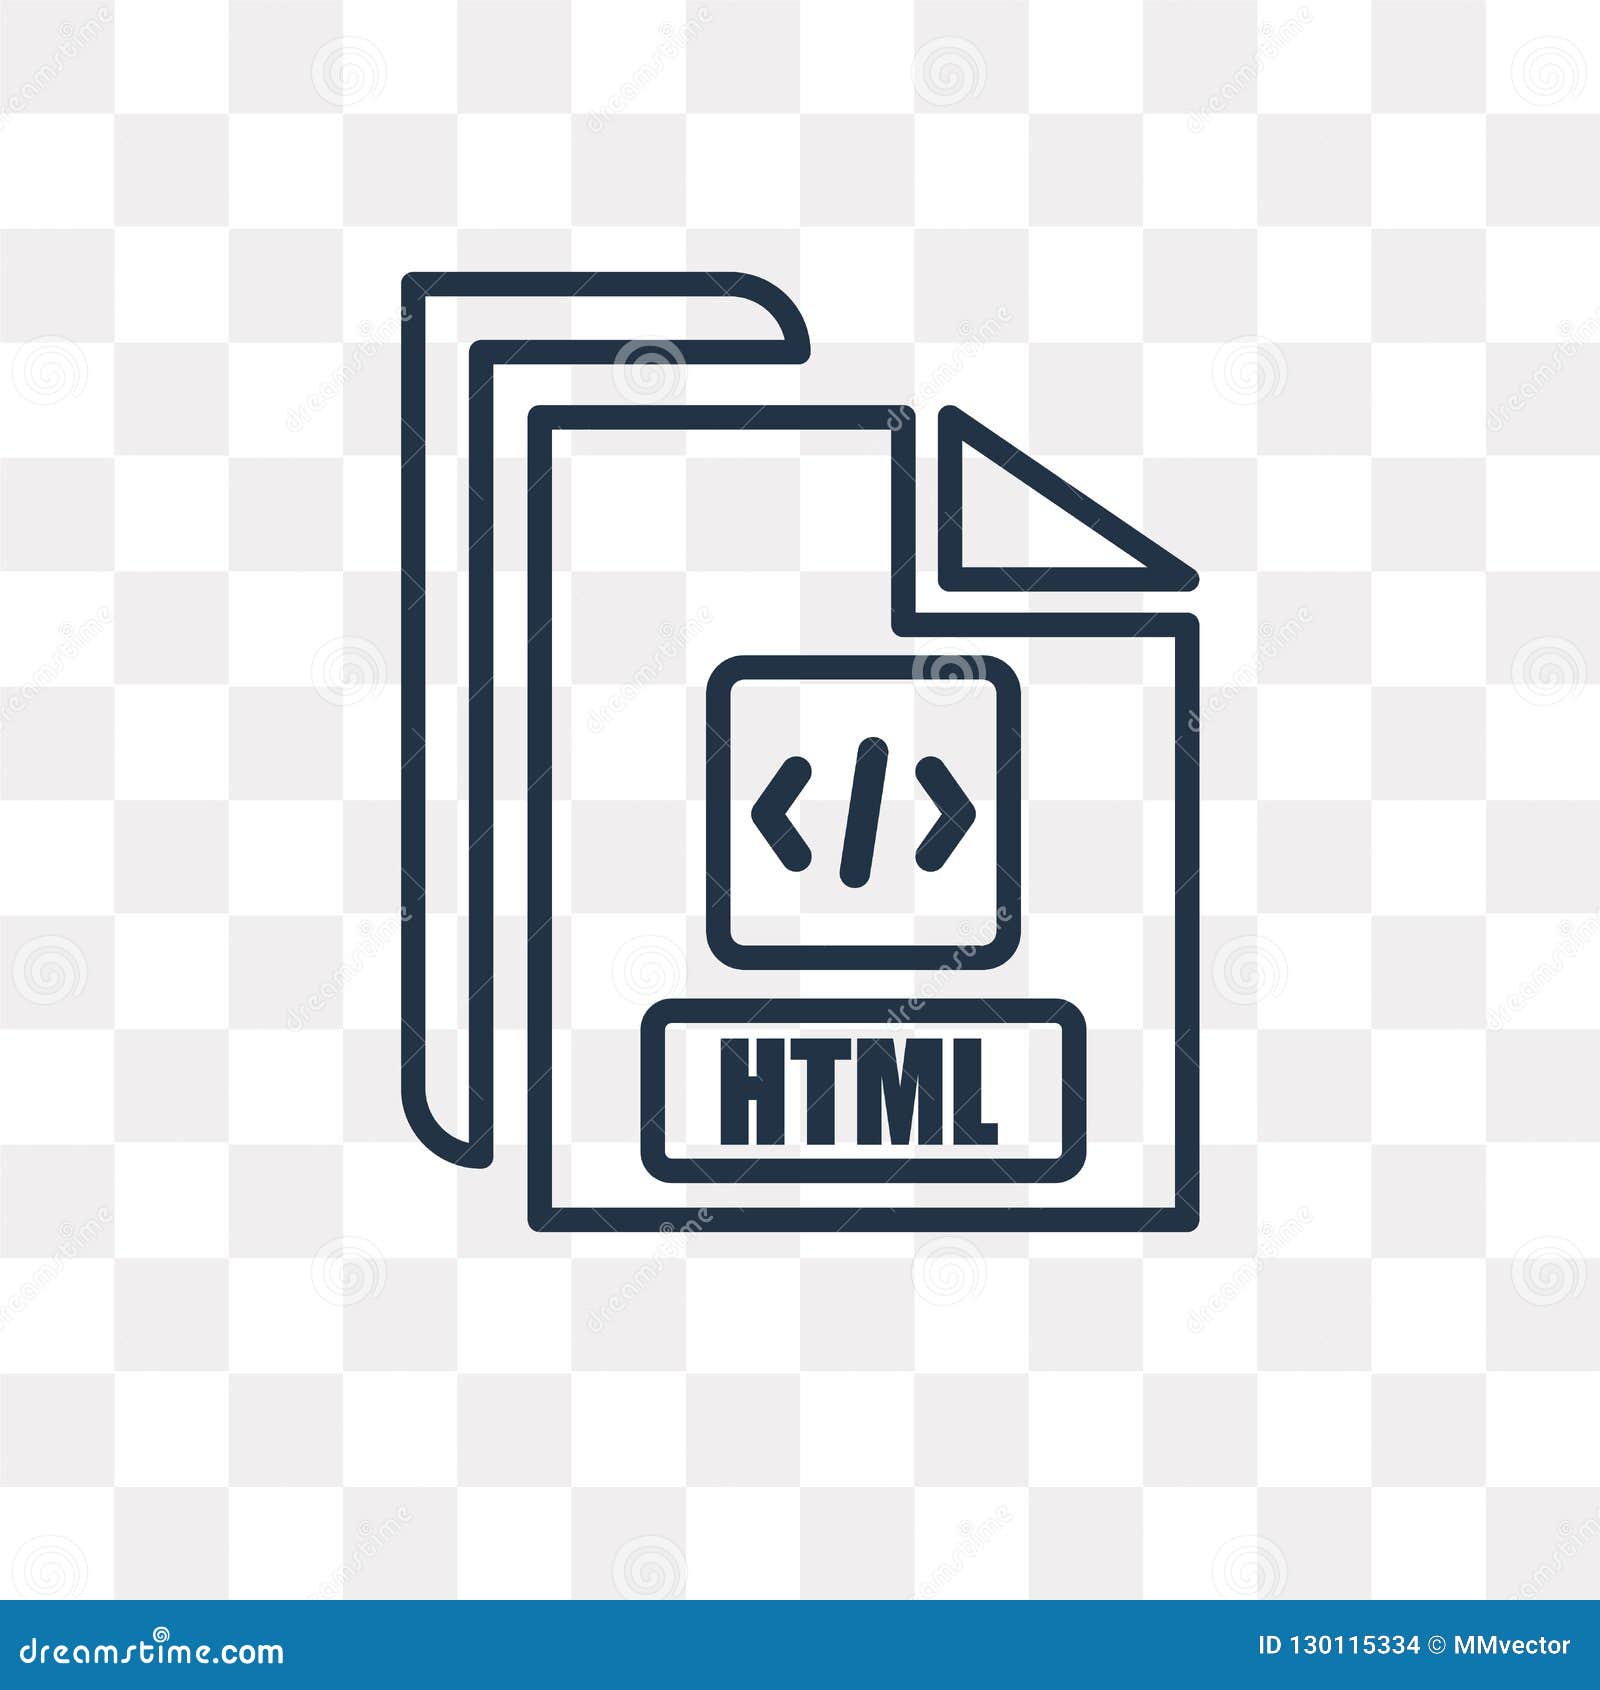 Html Vector Icon Isolated on Transparent Background, Linear Html Stock  Vector - Illustration of computer, coding: 130115334